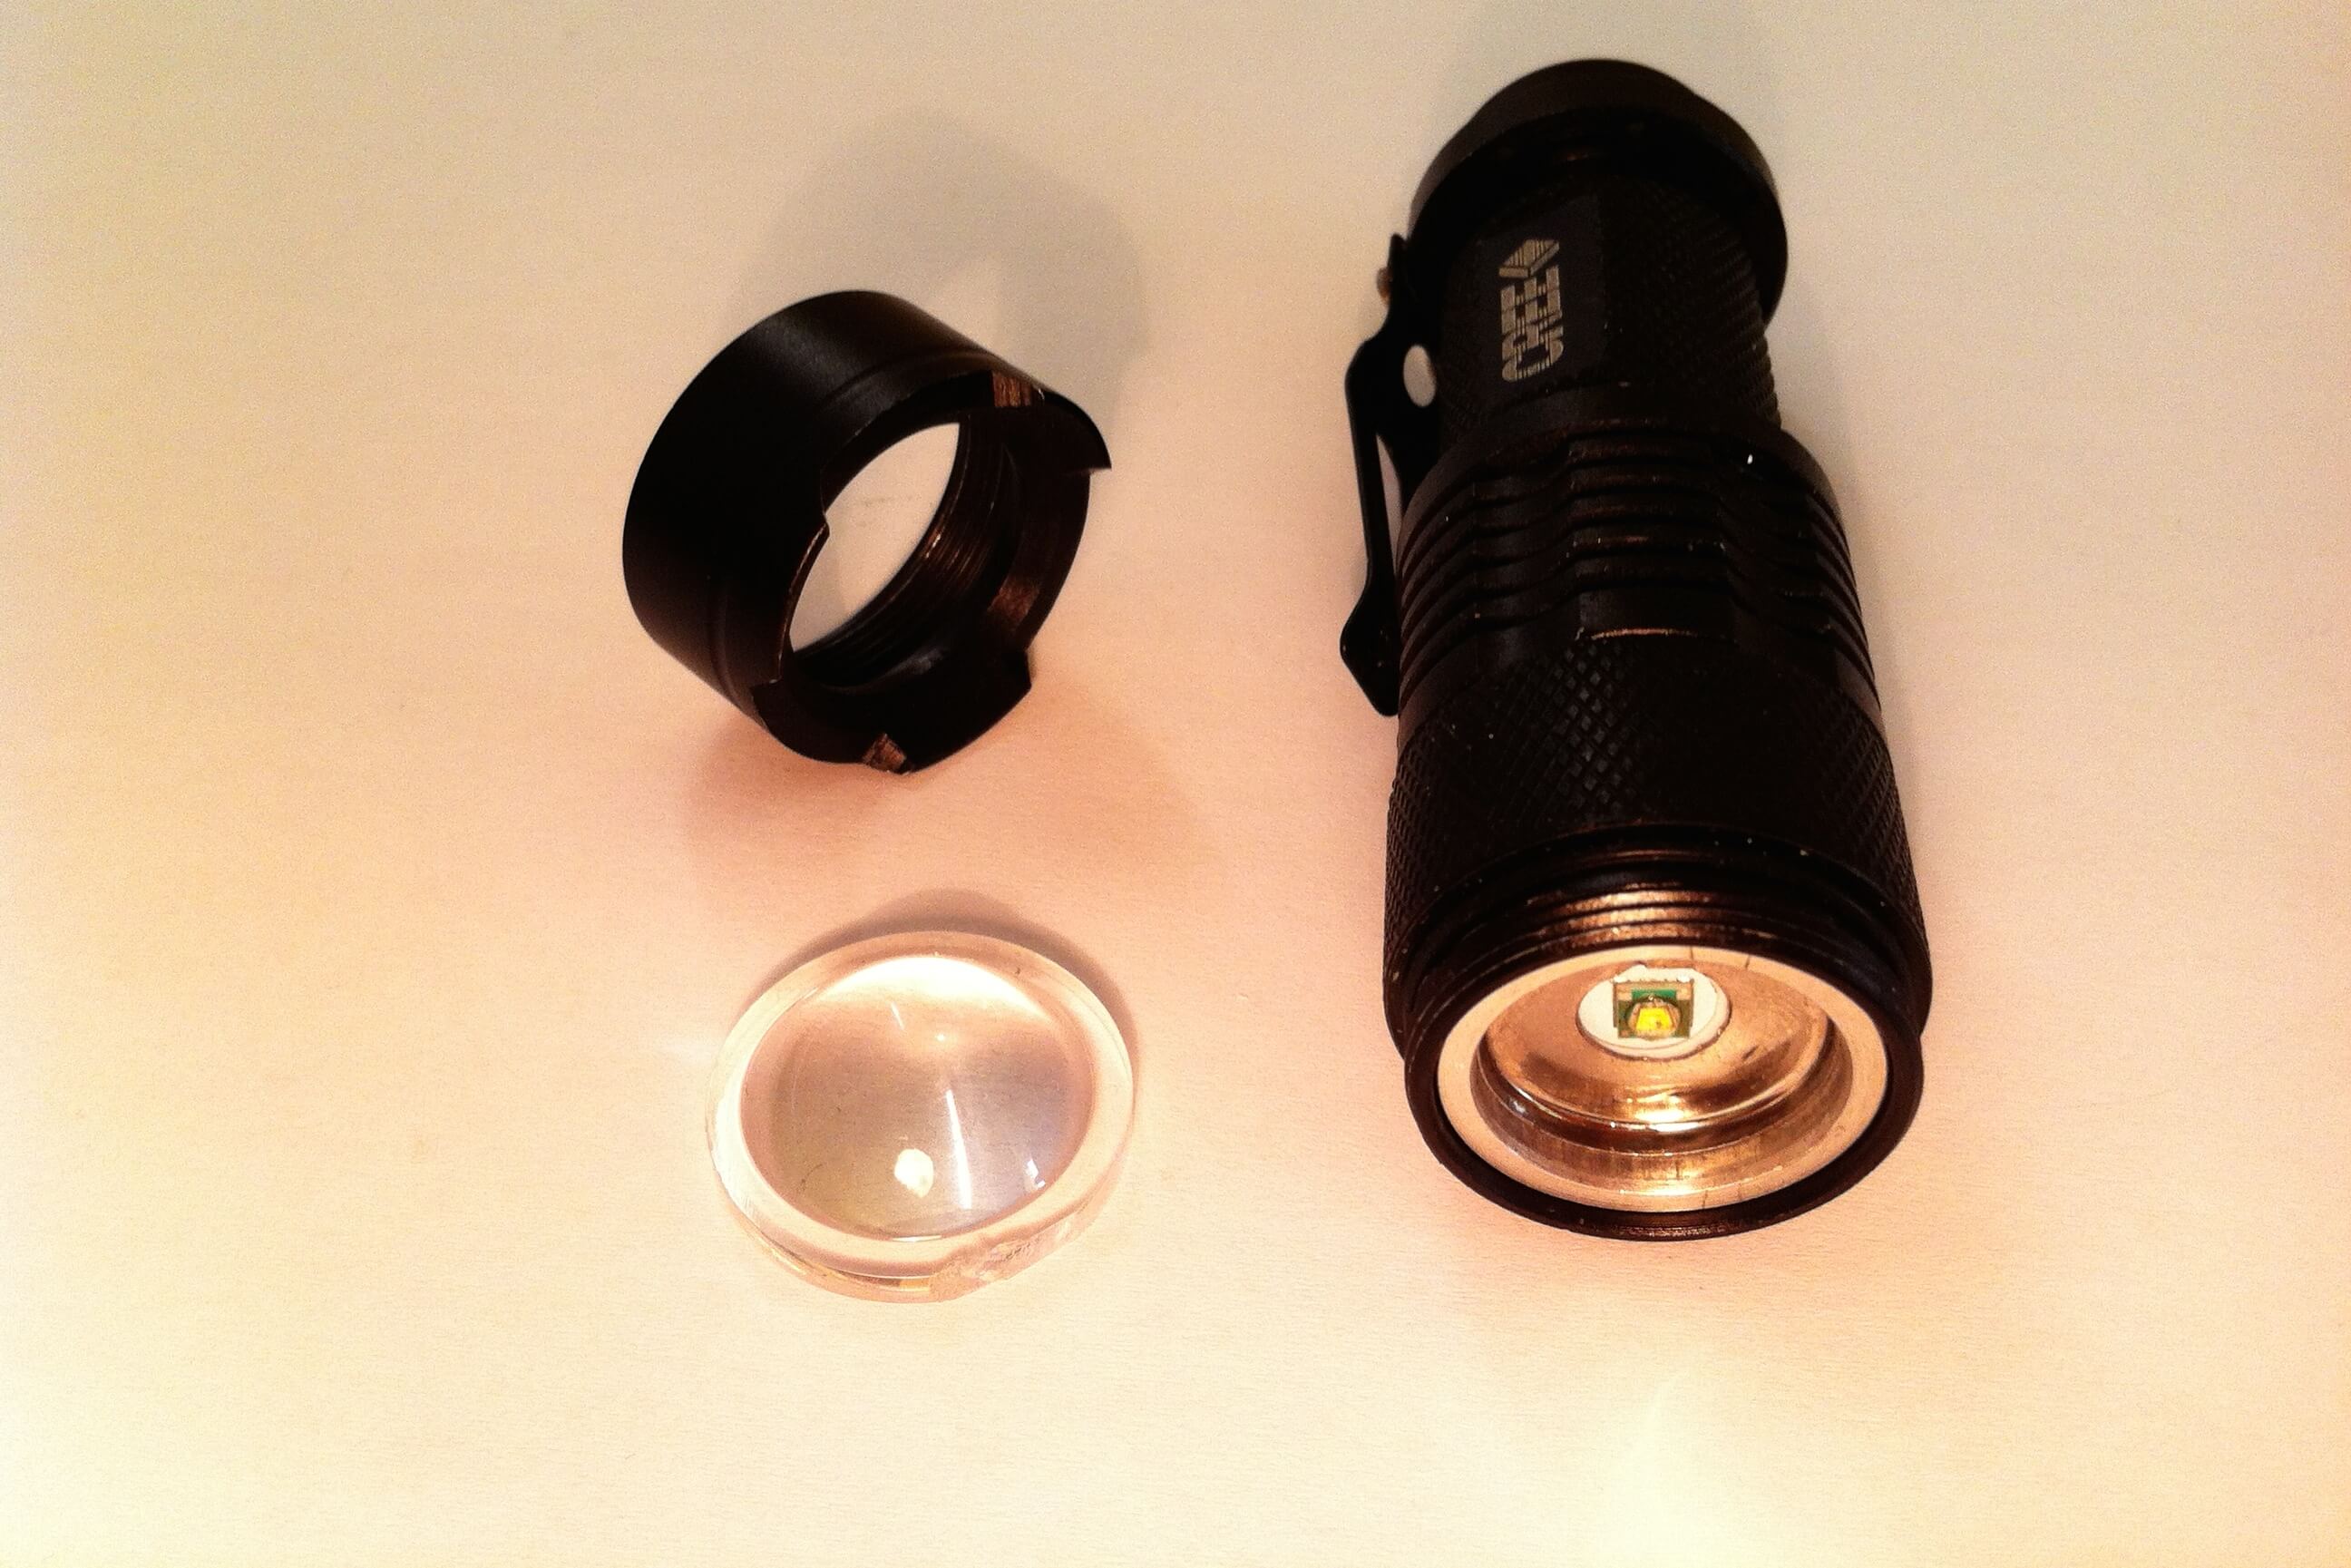 Disassembly - lens removed